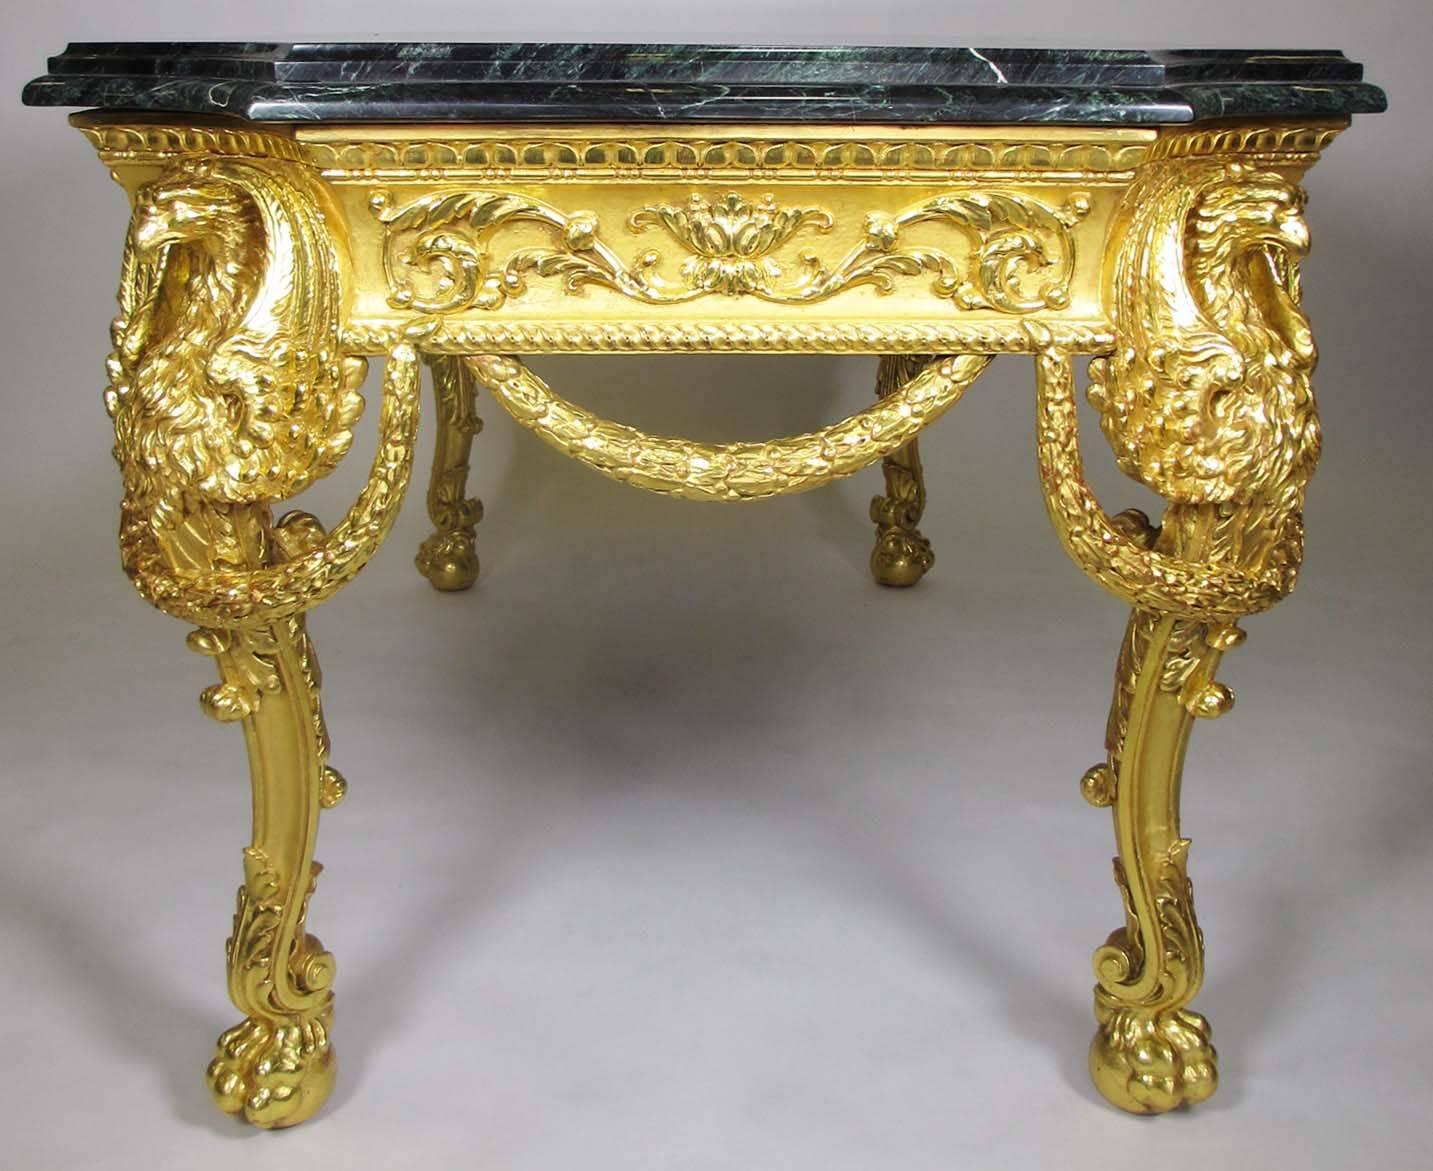 Palatial French 19th Century Empire Style Giltwood Carved Eagles Center Table For Sale 3